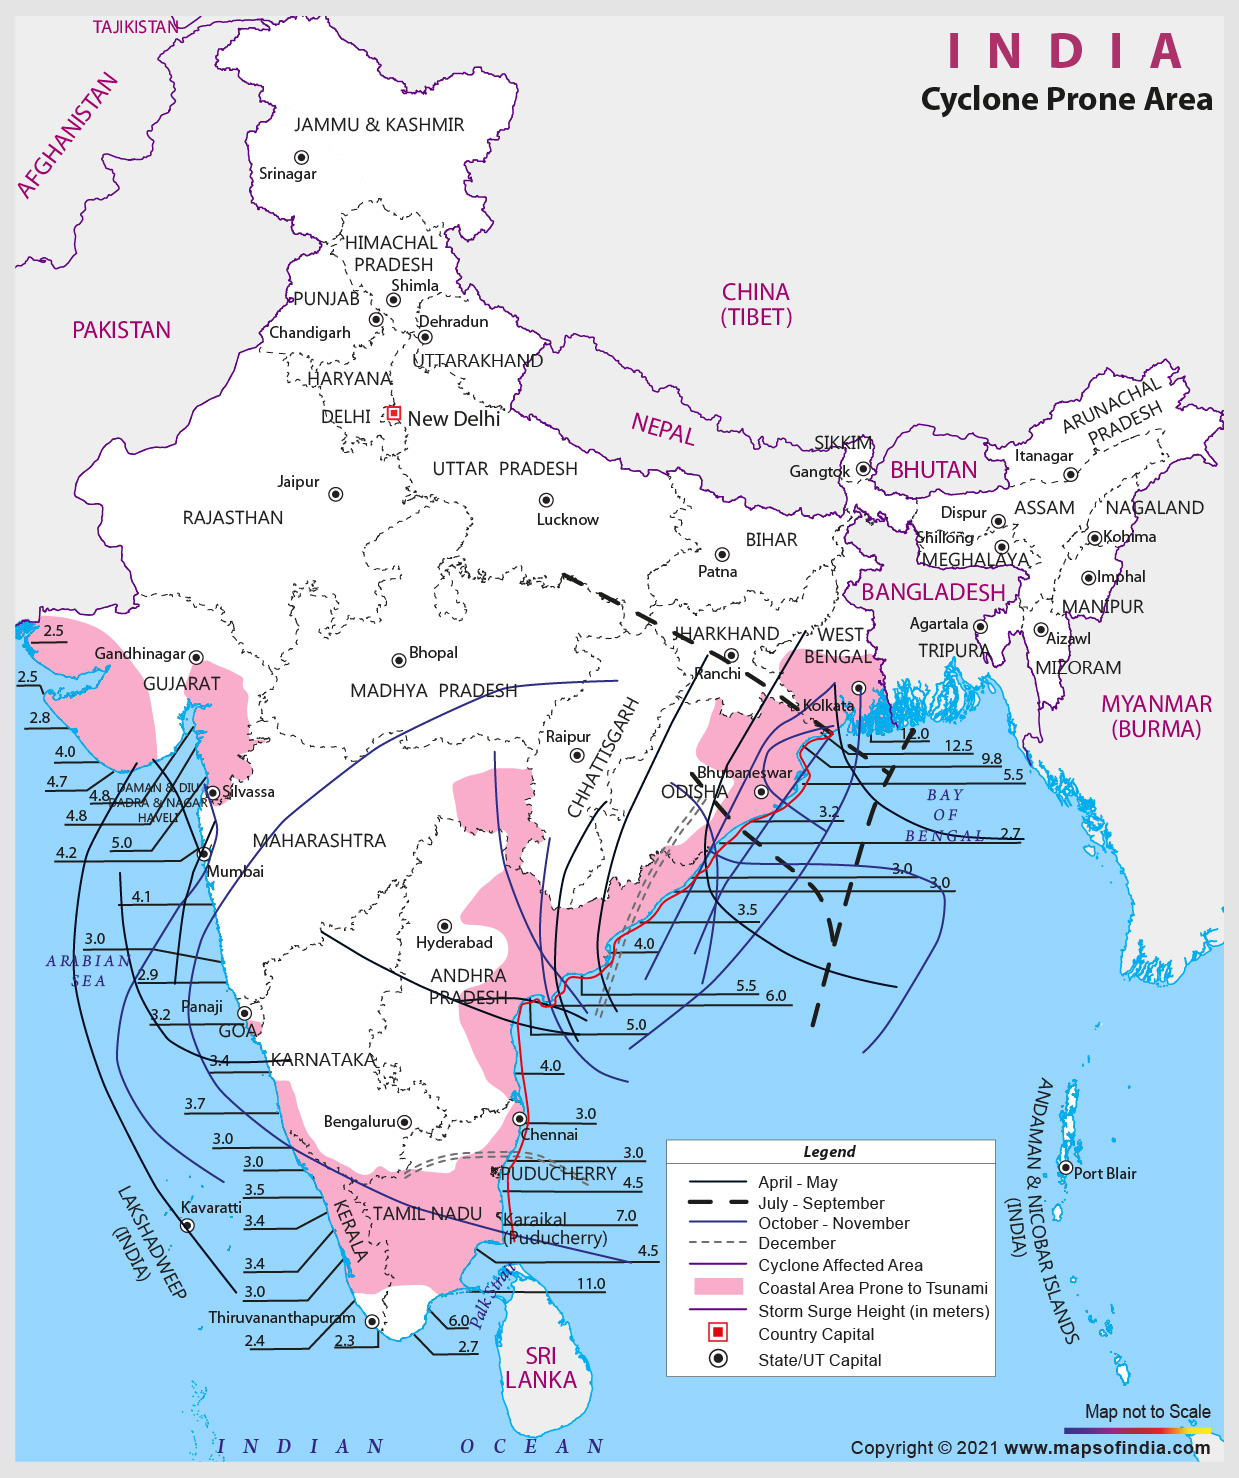 Cyclone Prone Areas in India